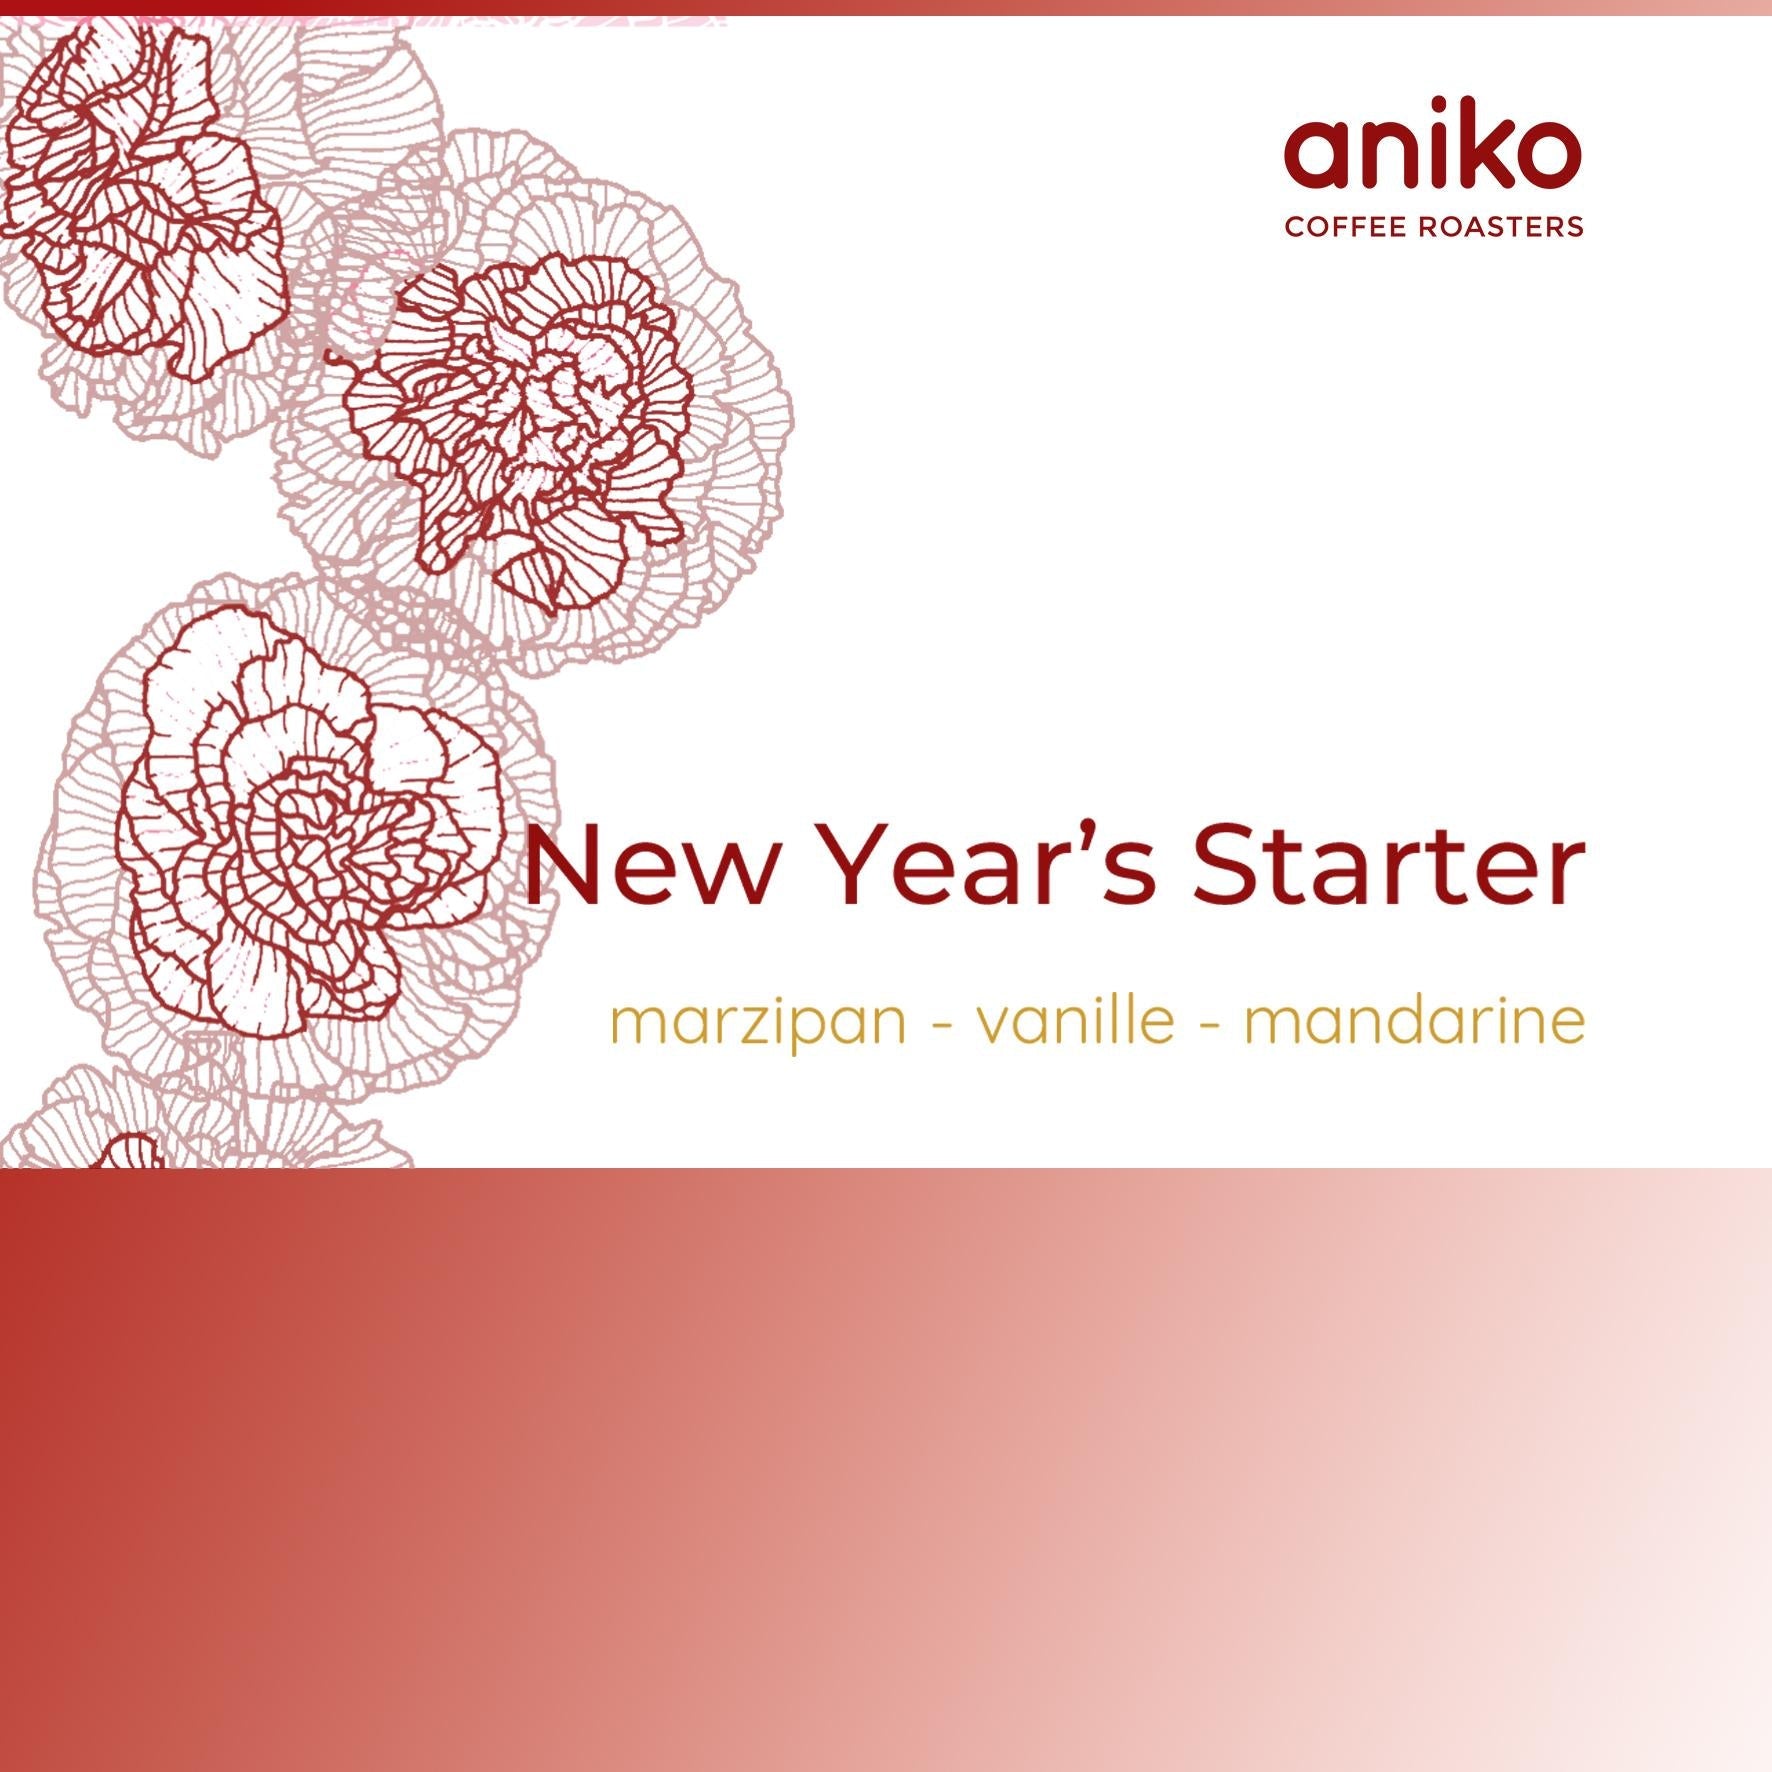 New Year' Starter commercial aniko Coffee Roasters 